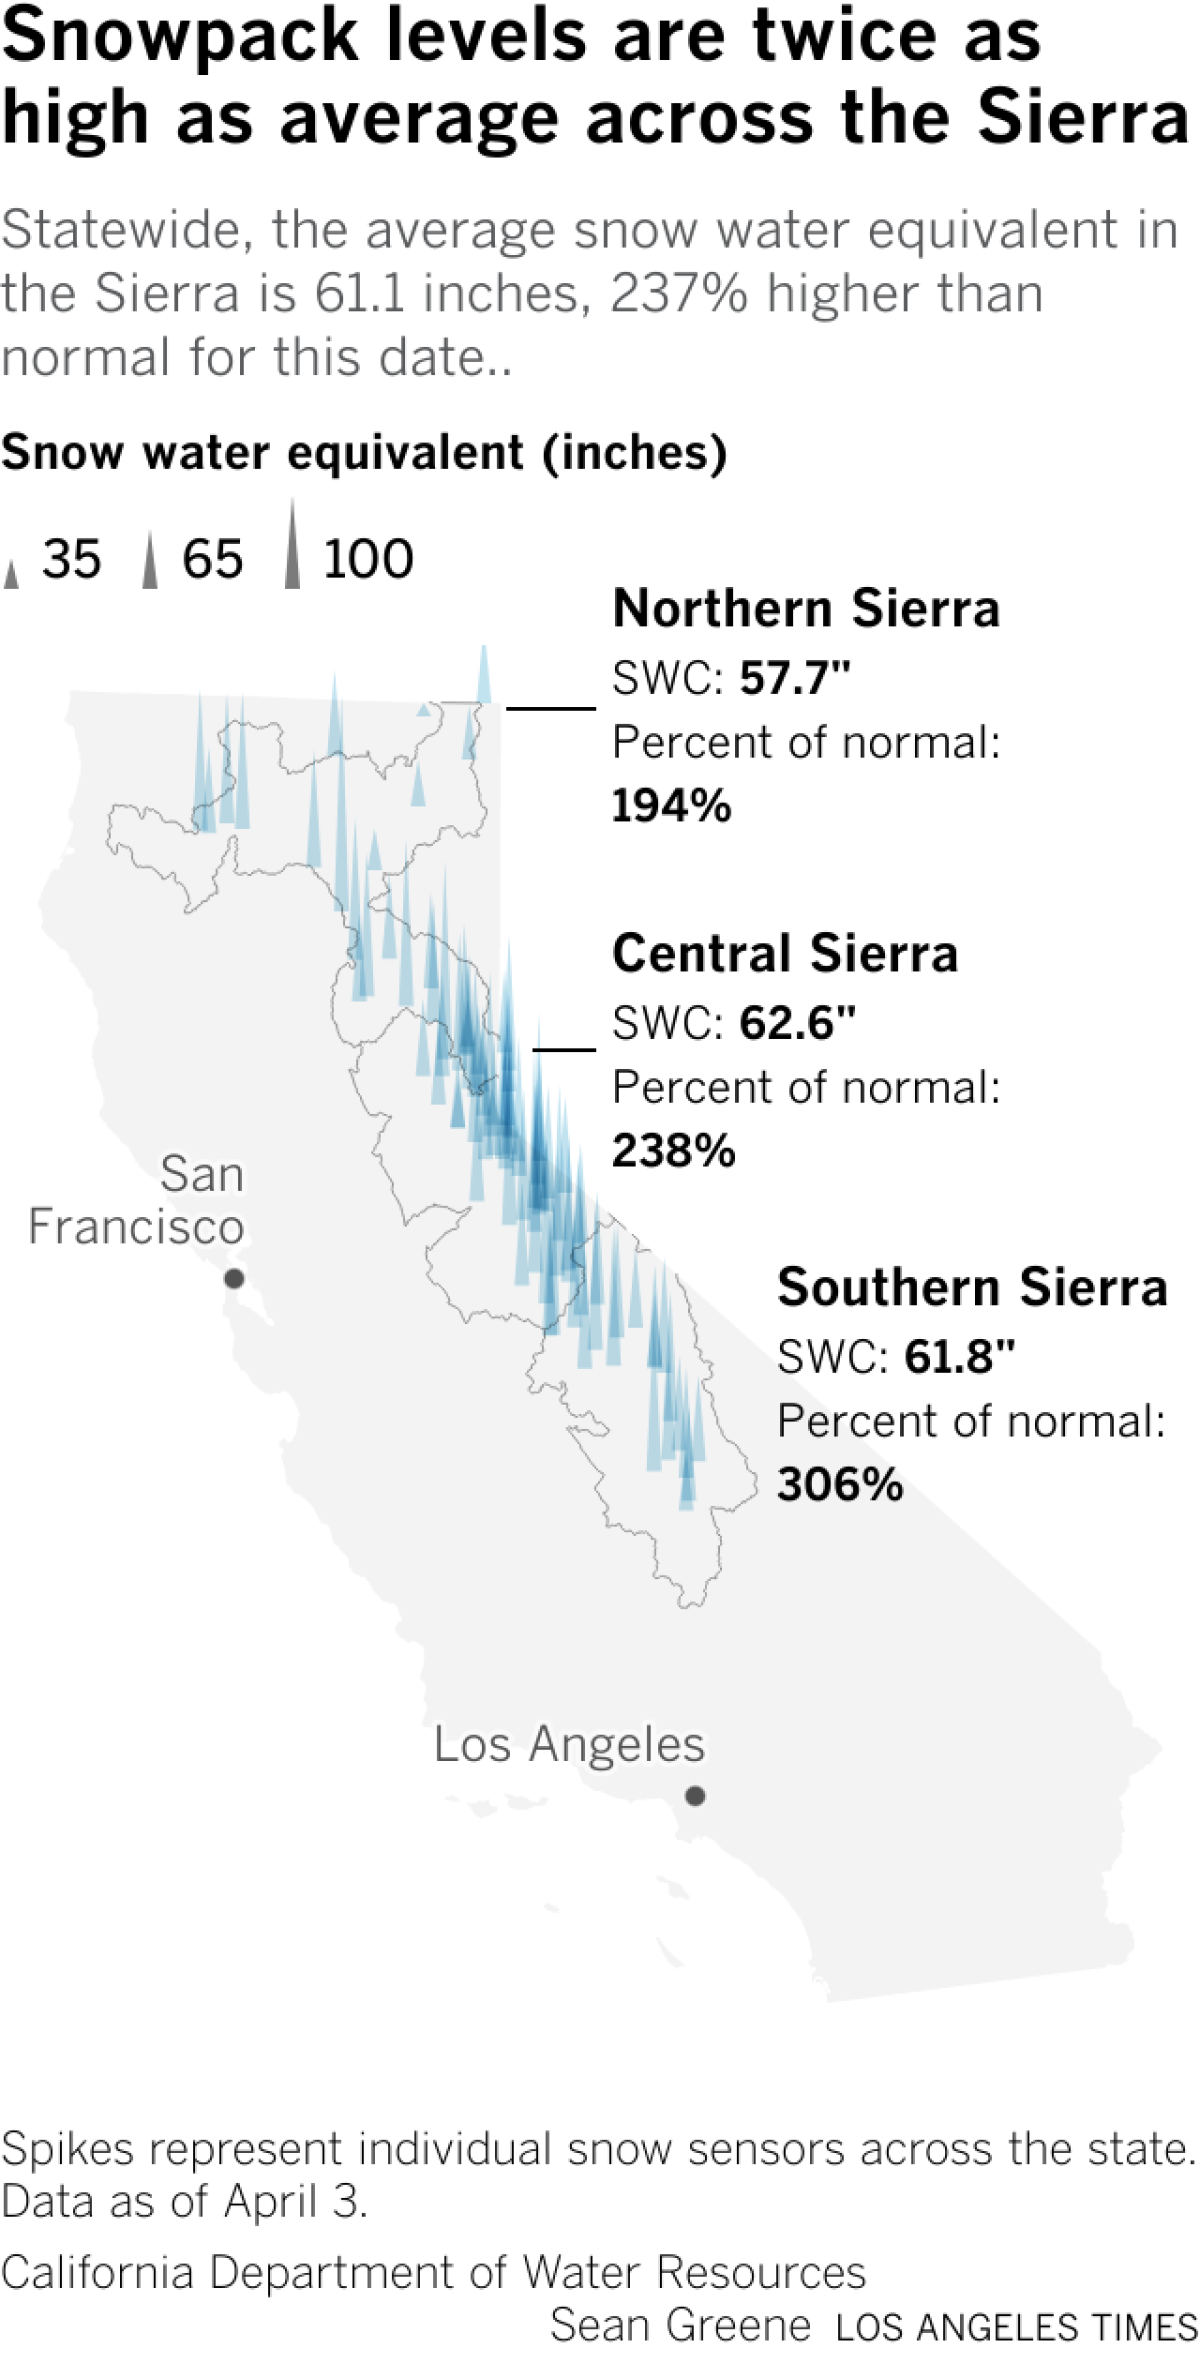 Map of snow sensors shows snow water content is highest on average in the central and southern Sierra.